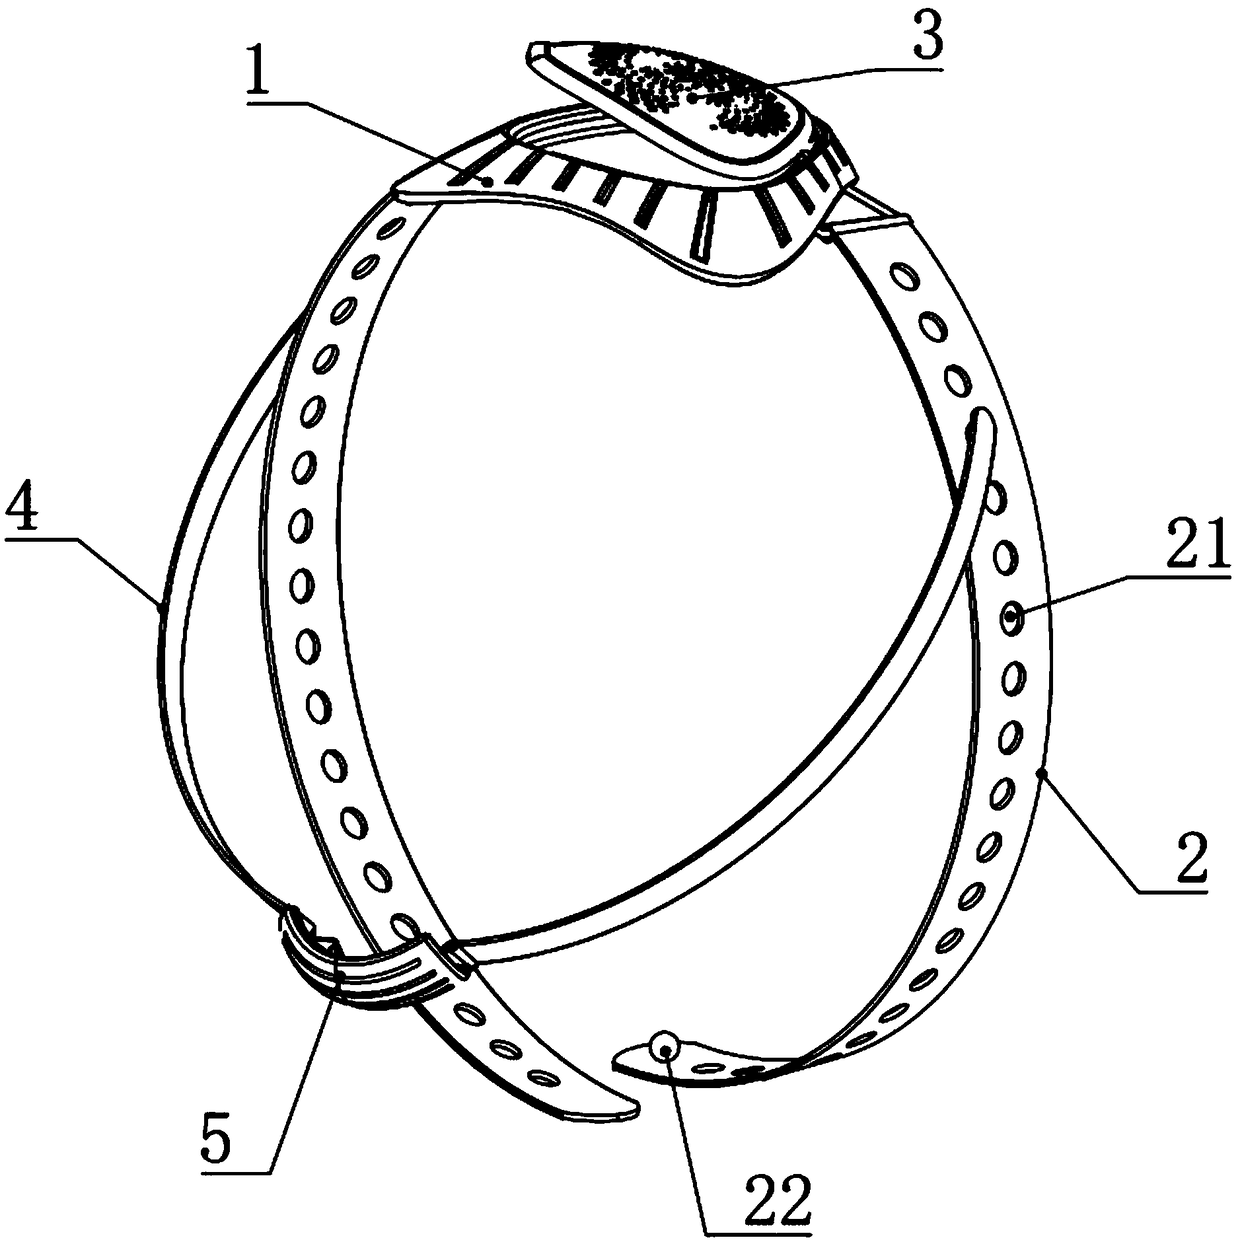 Head protection device of venous indwelling needle for infants